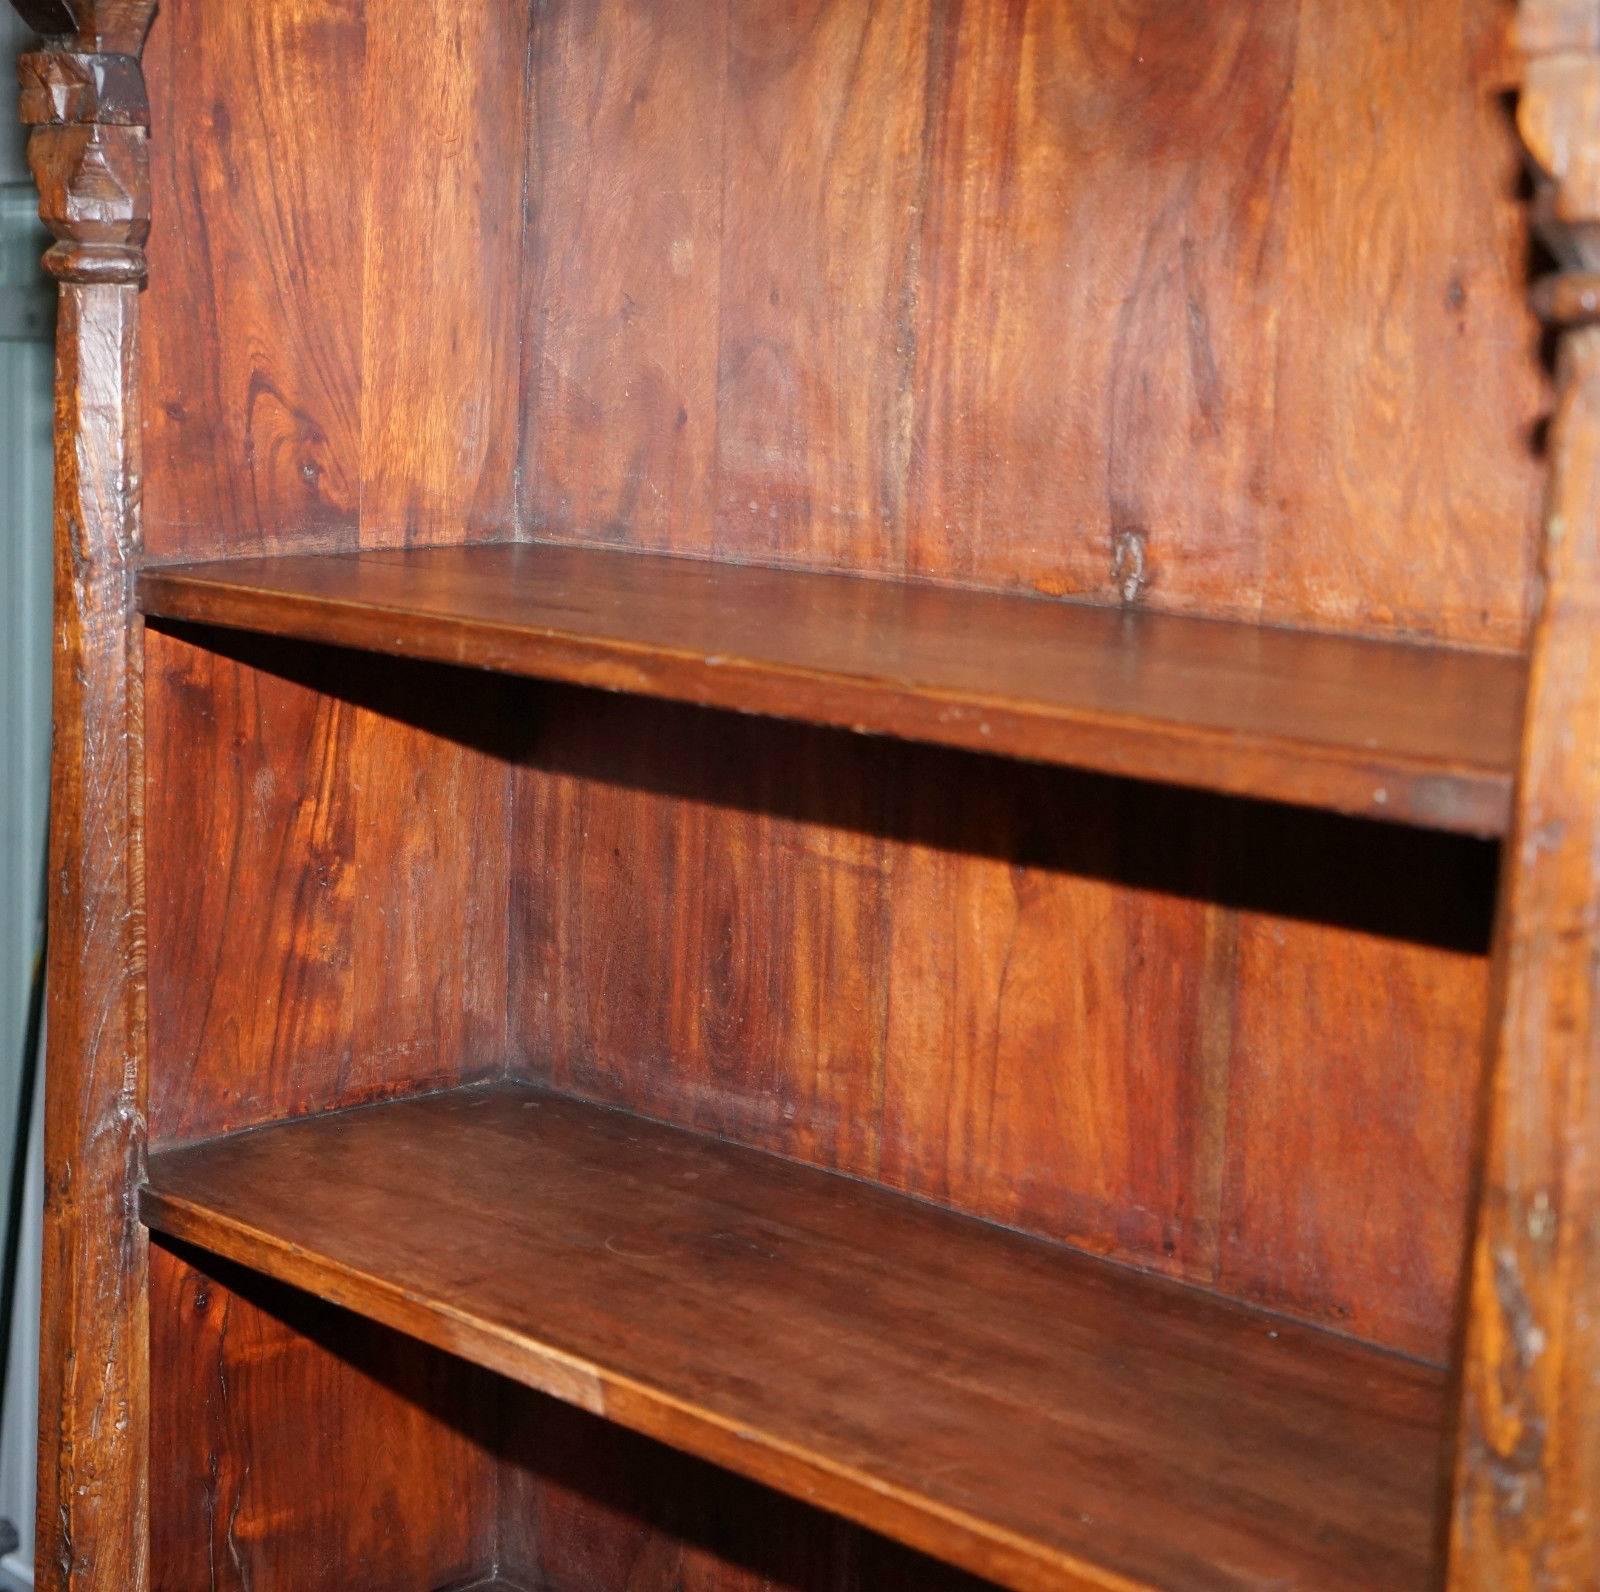 20th Century Solid Hand-Carved Teak Wood Bookcase, Extremely Heavy and Solid Well Made Piece